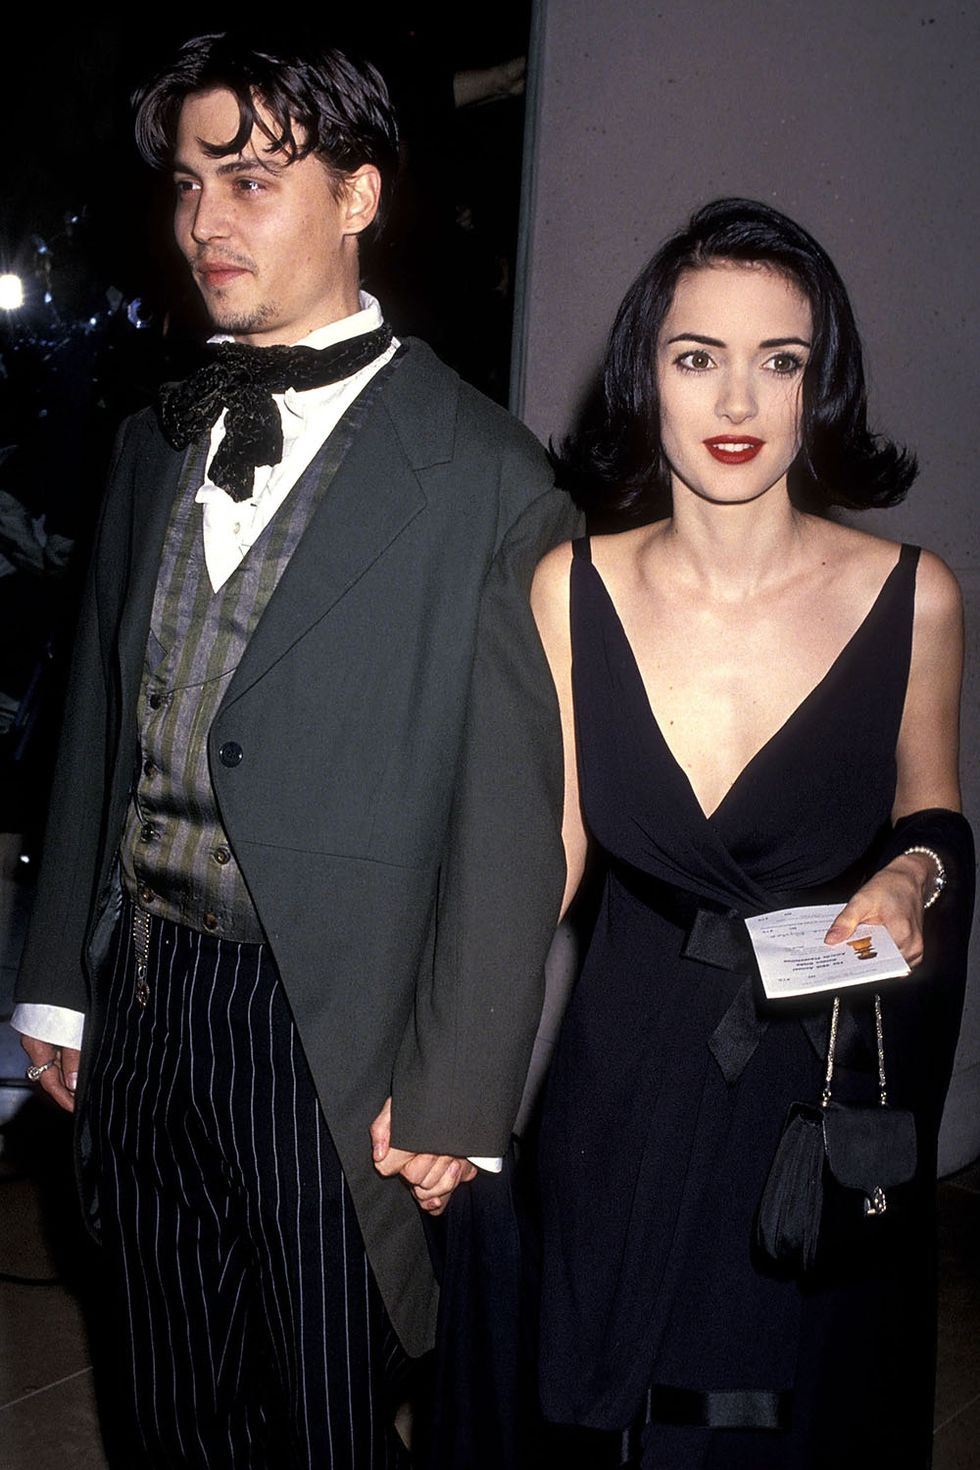 Winona Ryder Best Hair And Makeup Looks - Winona Ryder Old Vintage Photos